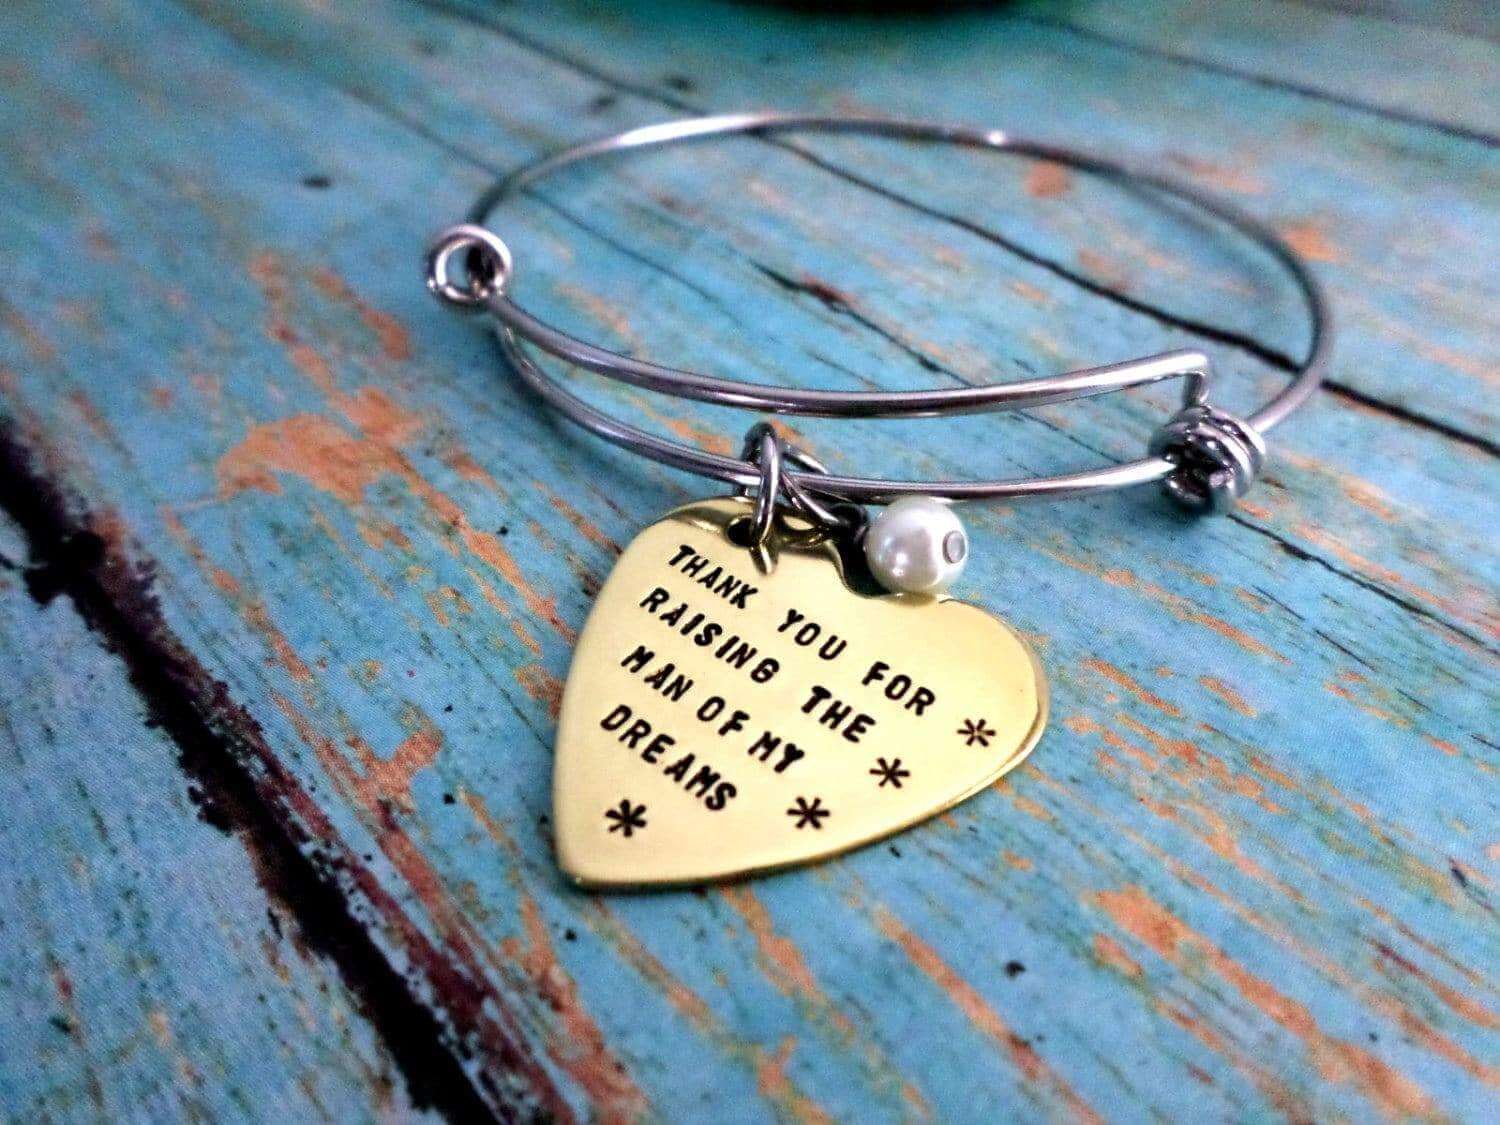 Mother In Law Bracelet, Thank You For Raising The Man Of My Dreams, Mother's Bracelet, Bangle Bracelet, Bracelets, HandmadeLoveStories, HandmadeLoveStories , [Handmade_Love_Stories], [Hand_Stamped_Jewelry], [Etsy_Stamped_Jewelry], [Etsy_Jewelry]